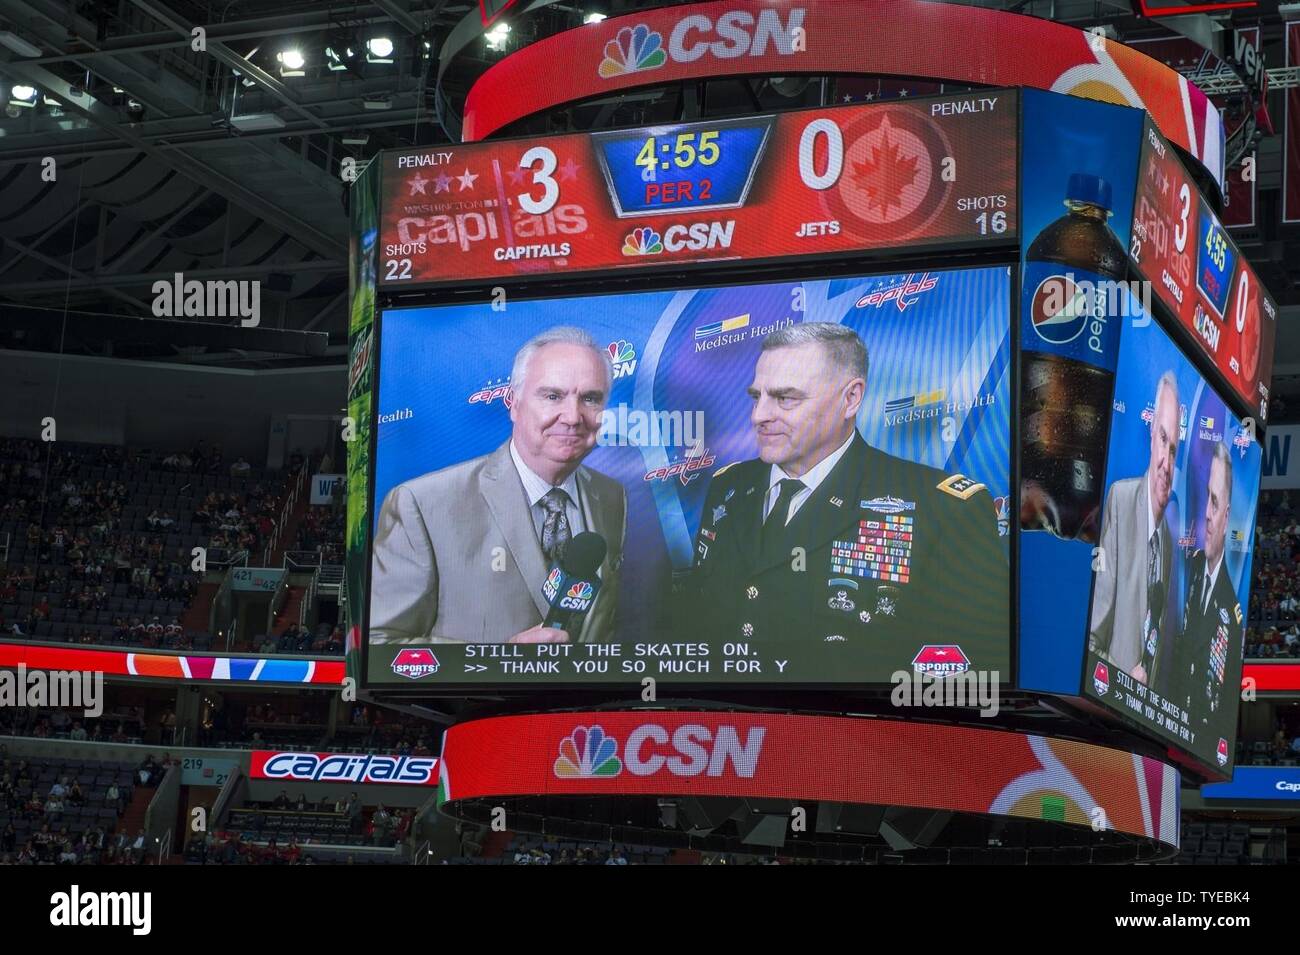 U.S. Army Chief of Staff Gen. Mark A. Milley during an interview at a National Hockey League game between the Washington Capitals and Winnipeg Jets in Washington D.C., Nov. 3, 2016. Milley was representing the U.S. Army for the Captial's Army Appreciation Night. Stock Photo